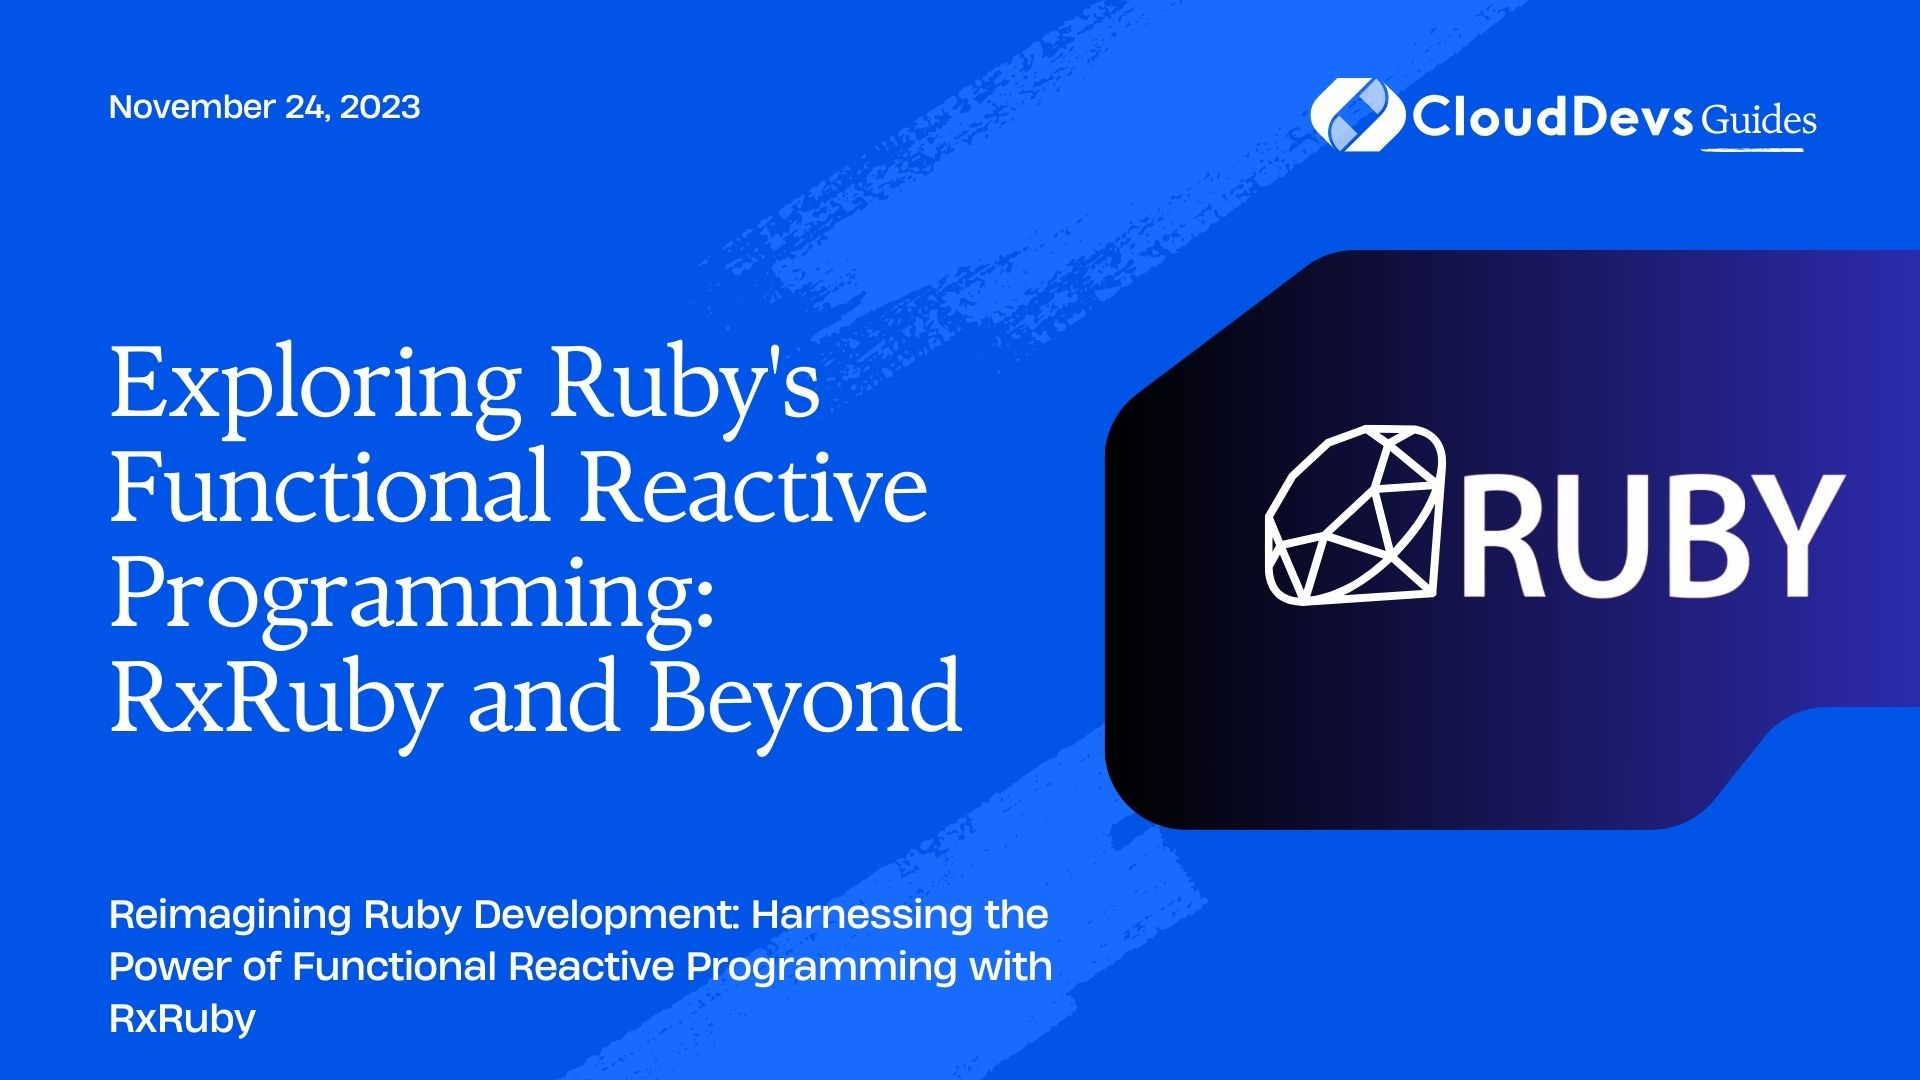 Exploring Ruby's Functional Reactive Programming: RxRuby and Beyond